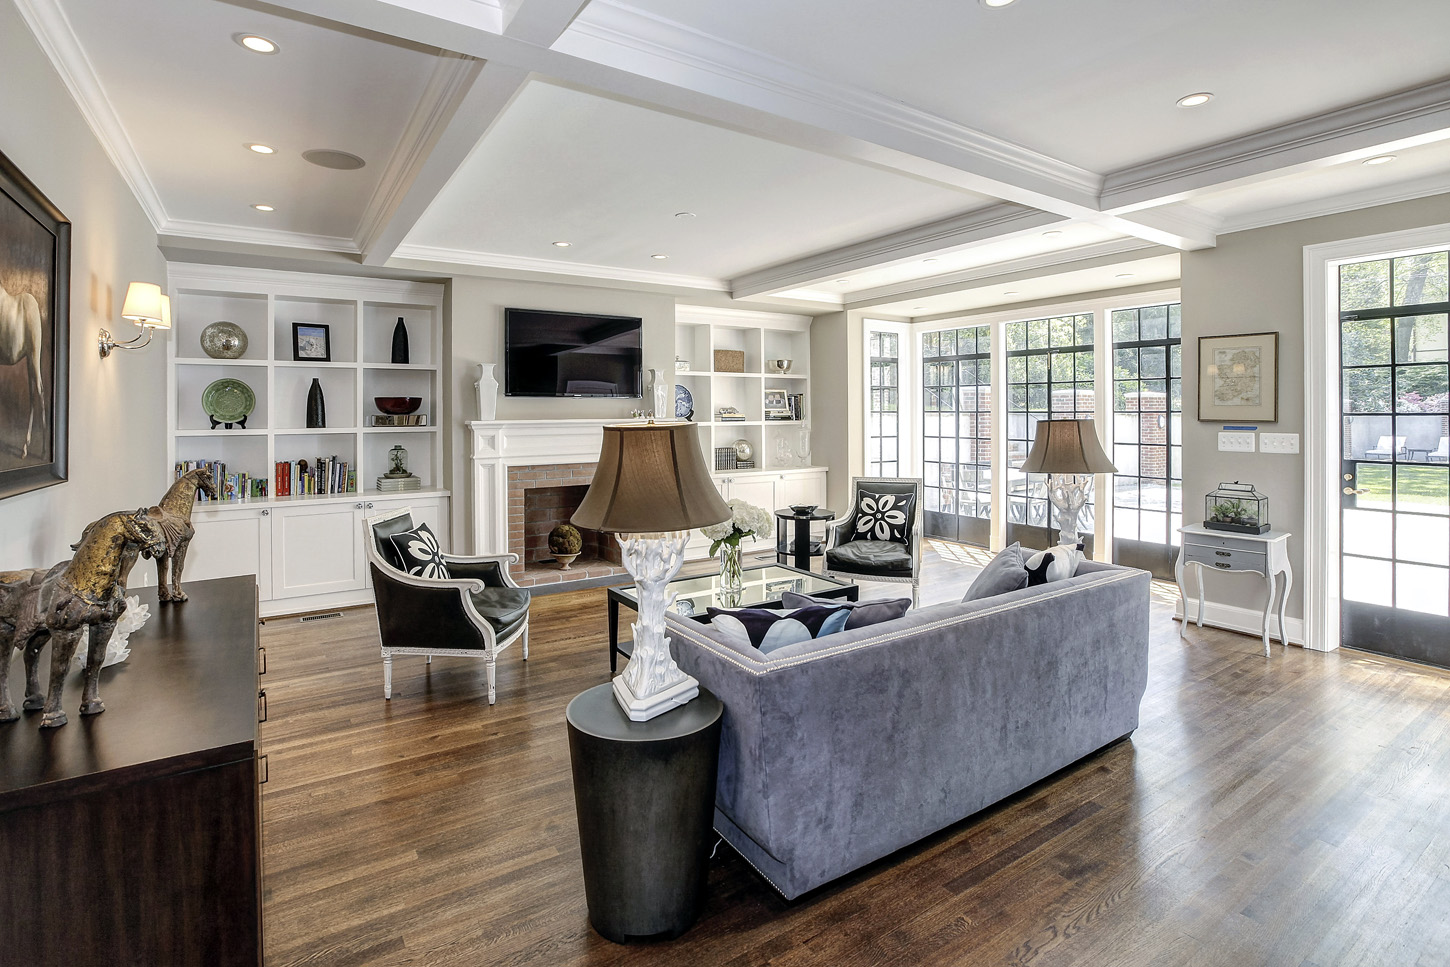 The family room of the Obamas' new house, in the Kalorama area of Northwest D.C. (Courtesy McFadden Group)